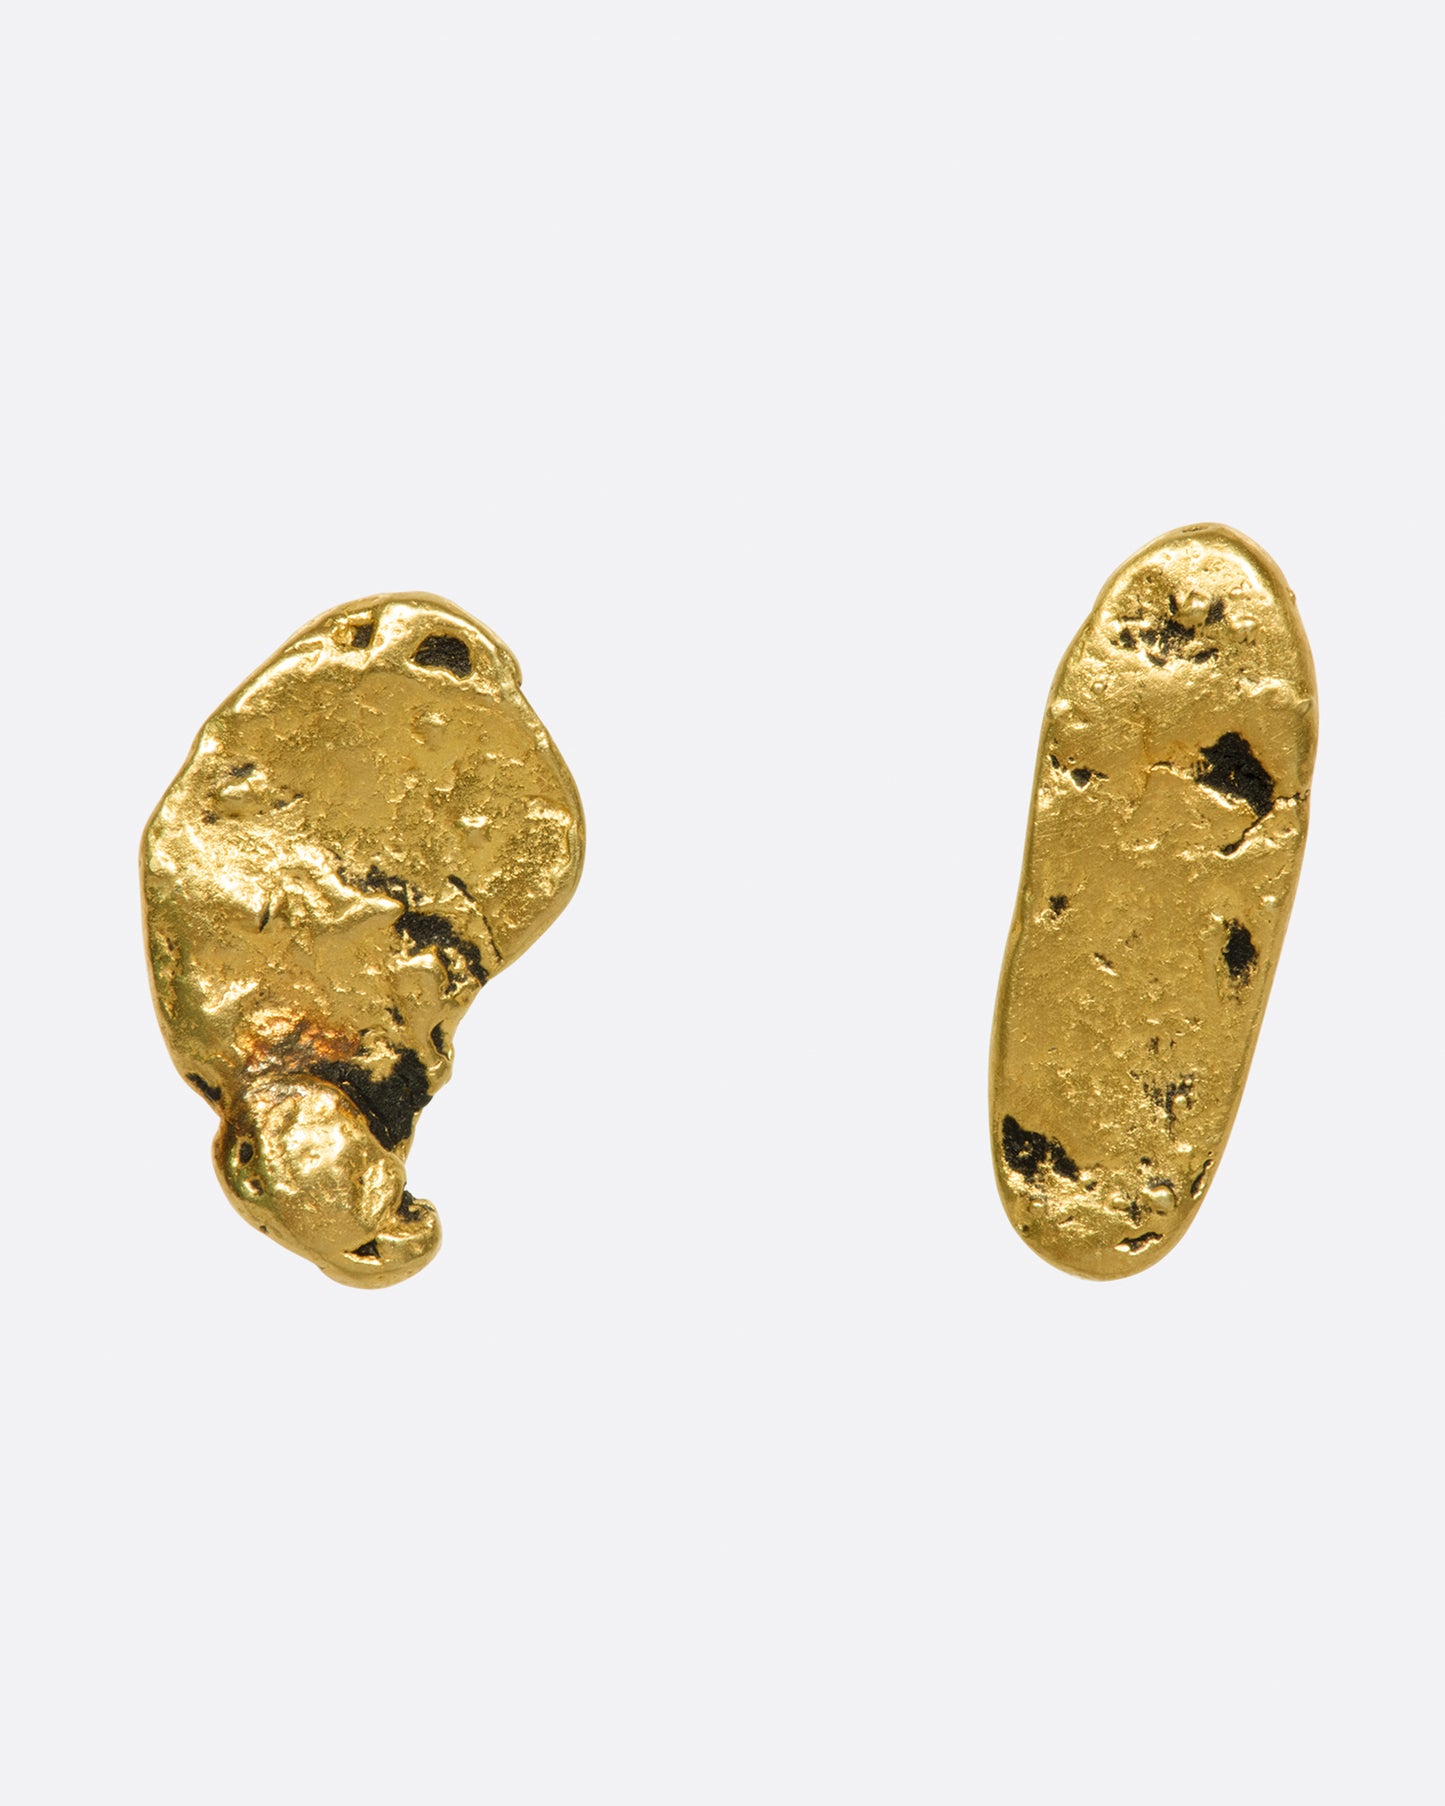 A pair of mismatched gold nugget stud earrings, shown from the front.